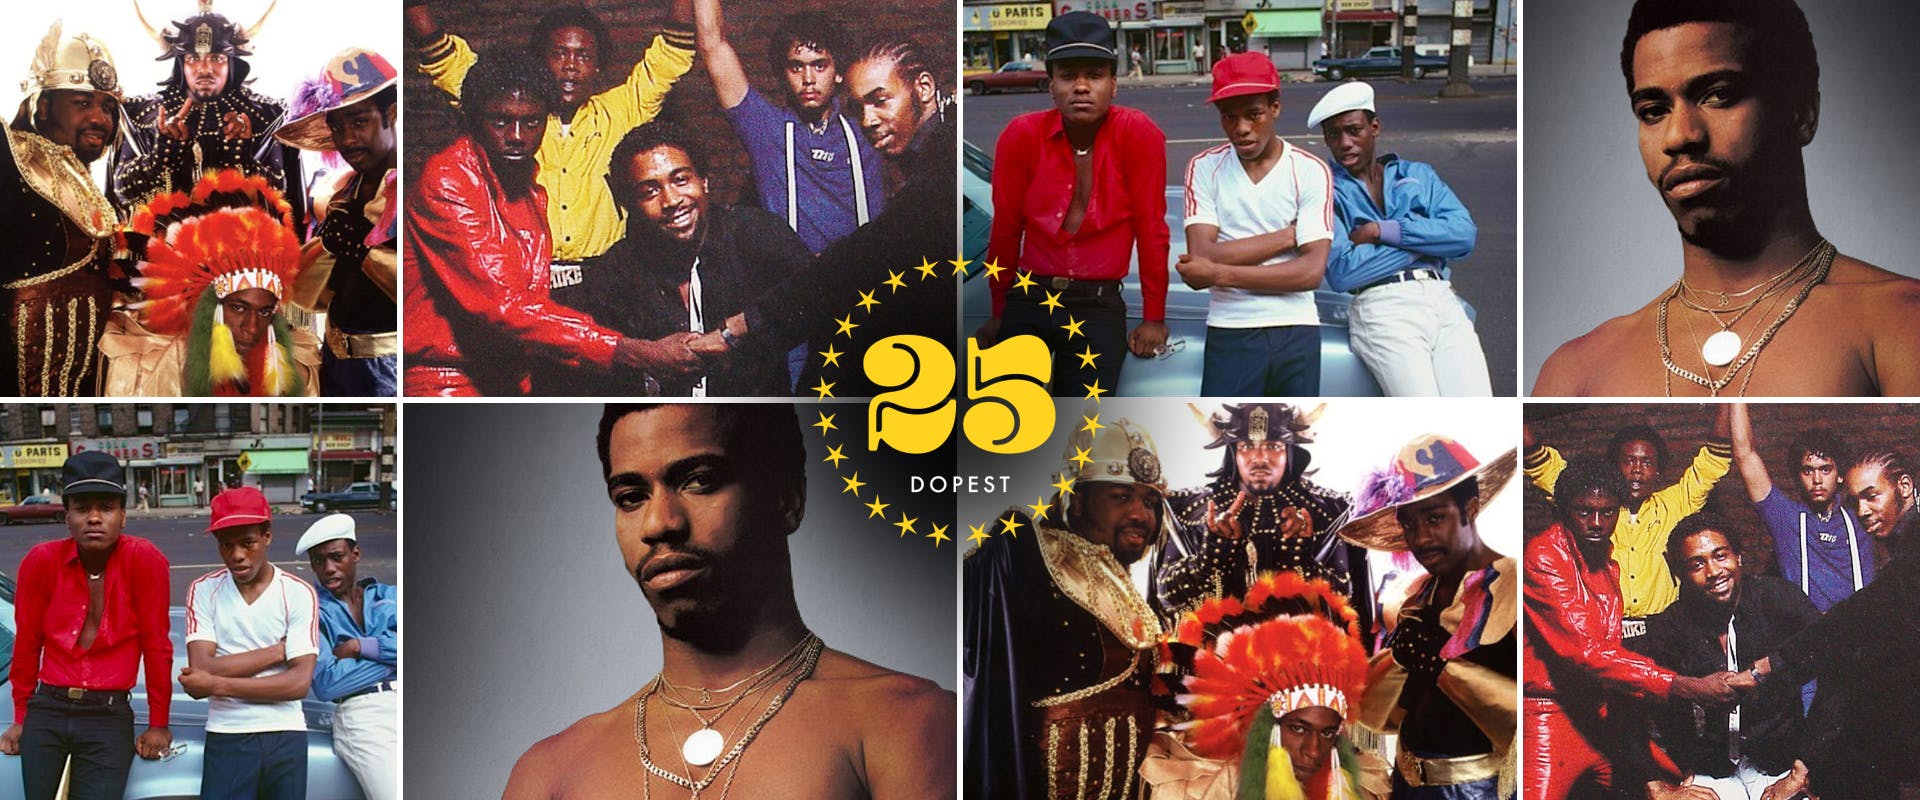 The 25 Dopest Early Rap Songs